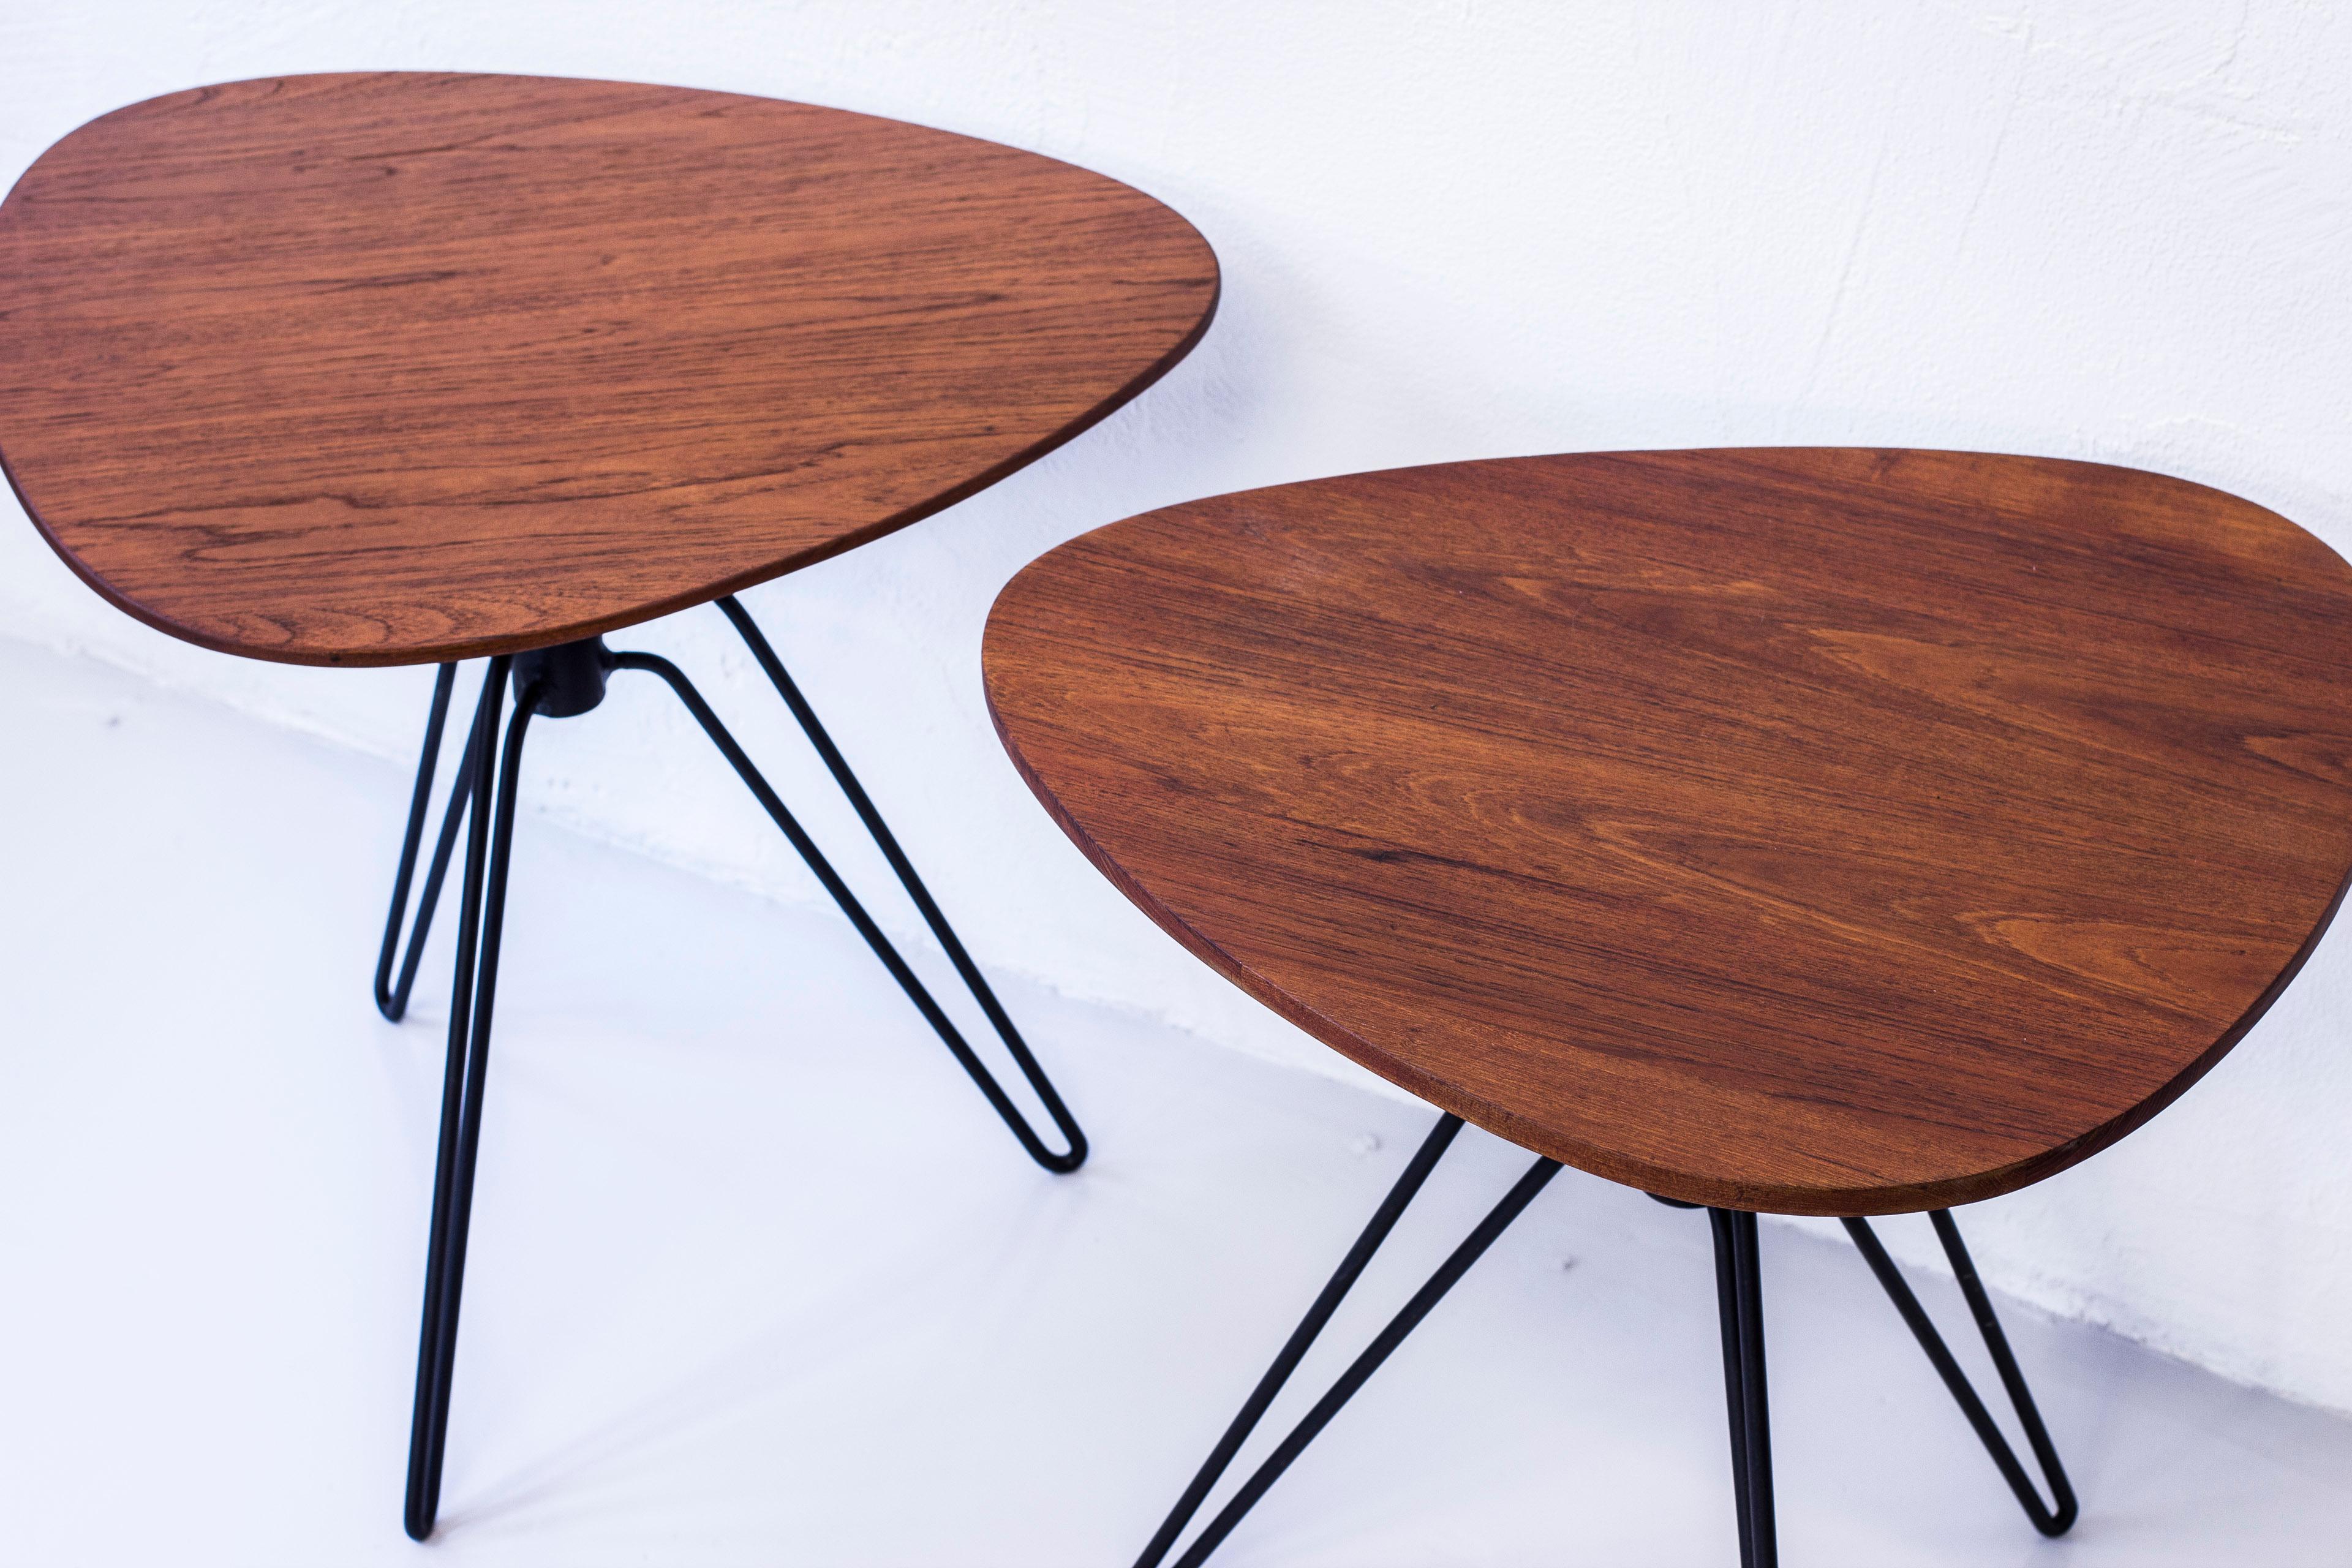 Metal Pair of Side Tables by Hans Agne Jakobsson, Sweden, 1950s